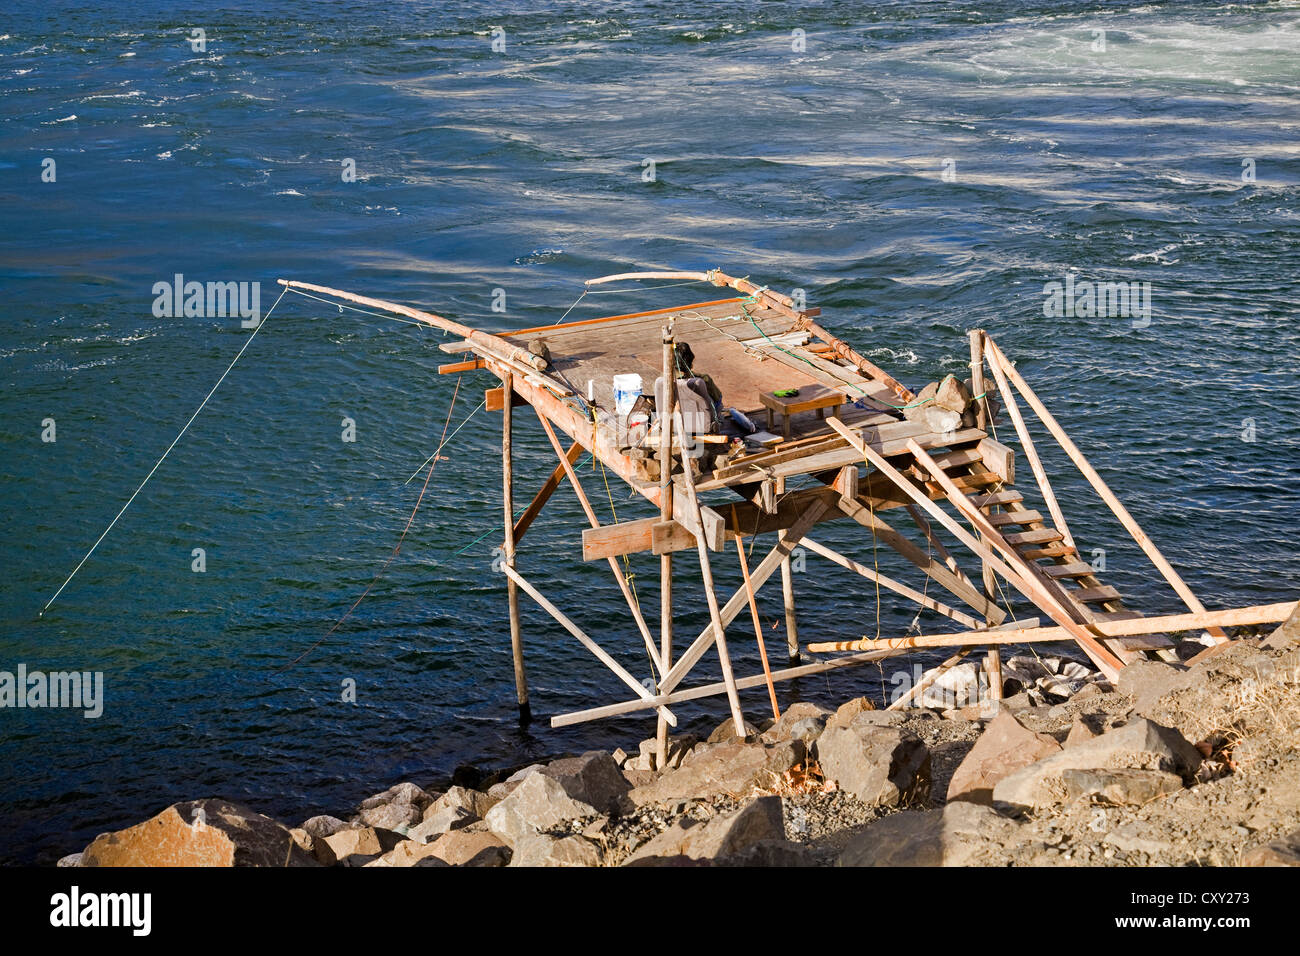 An Indian waits on a platform from which native american people fish for salmon on the Columbia River beneath John Day Dam. Stock Photo